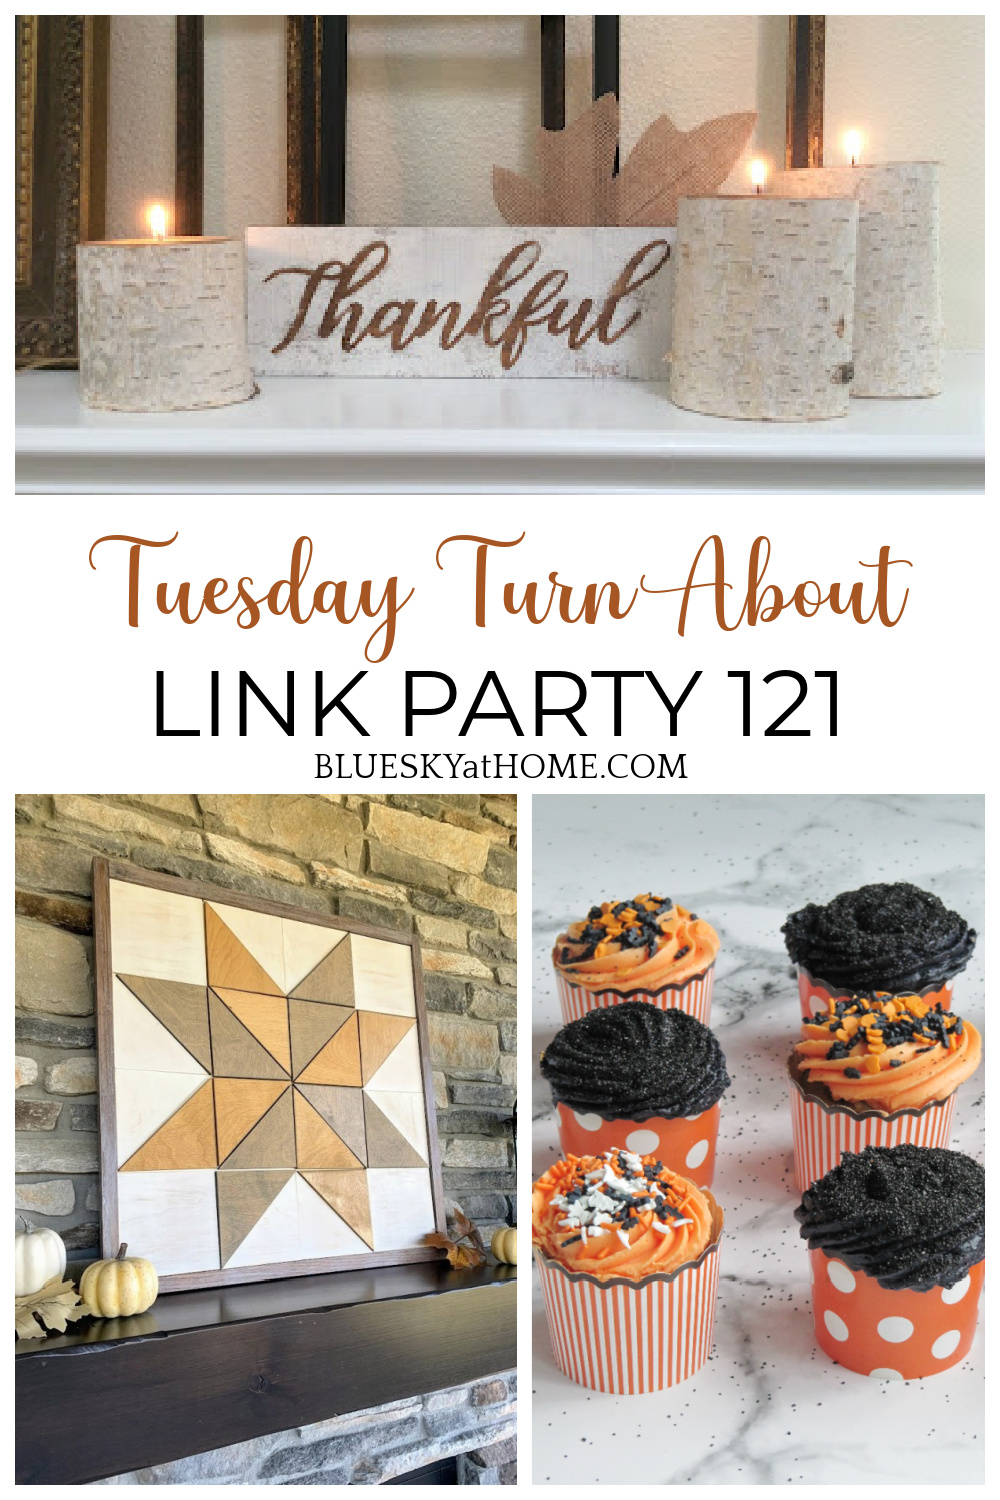 Tuesday Turn About Link Party 121